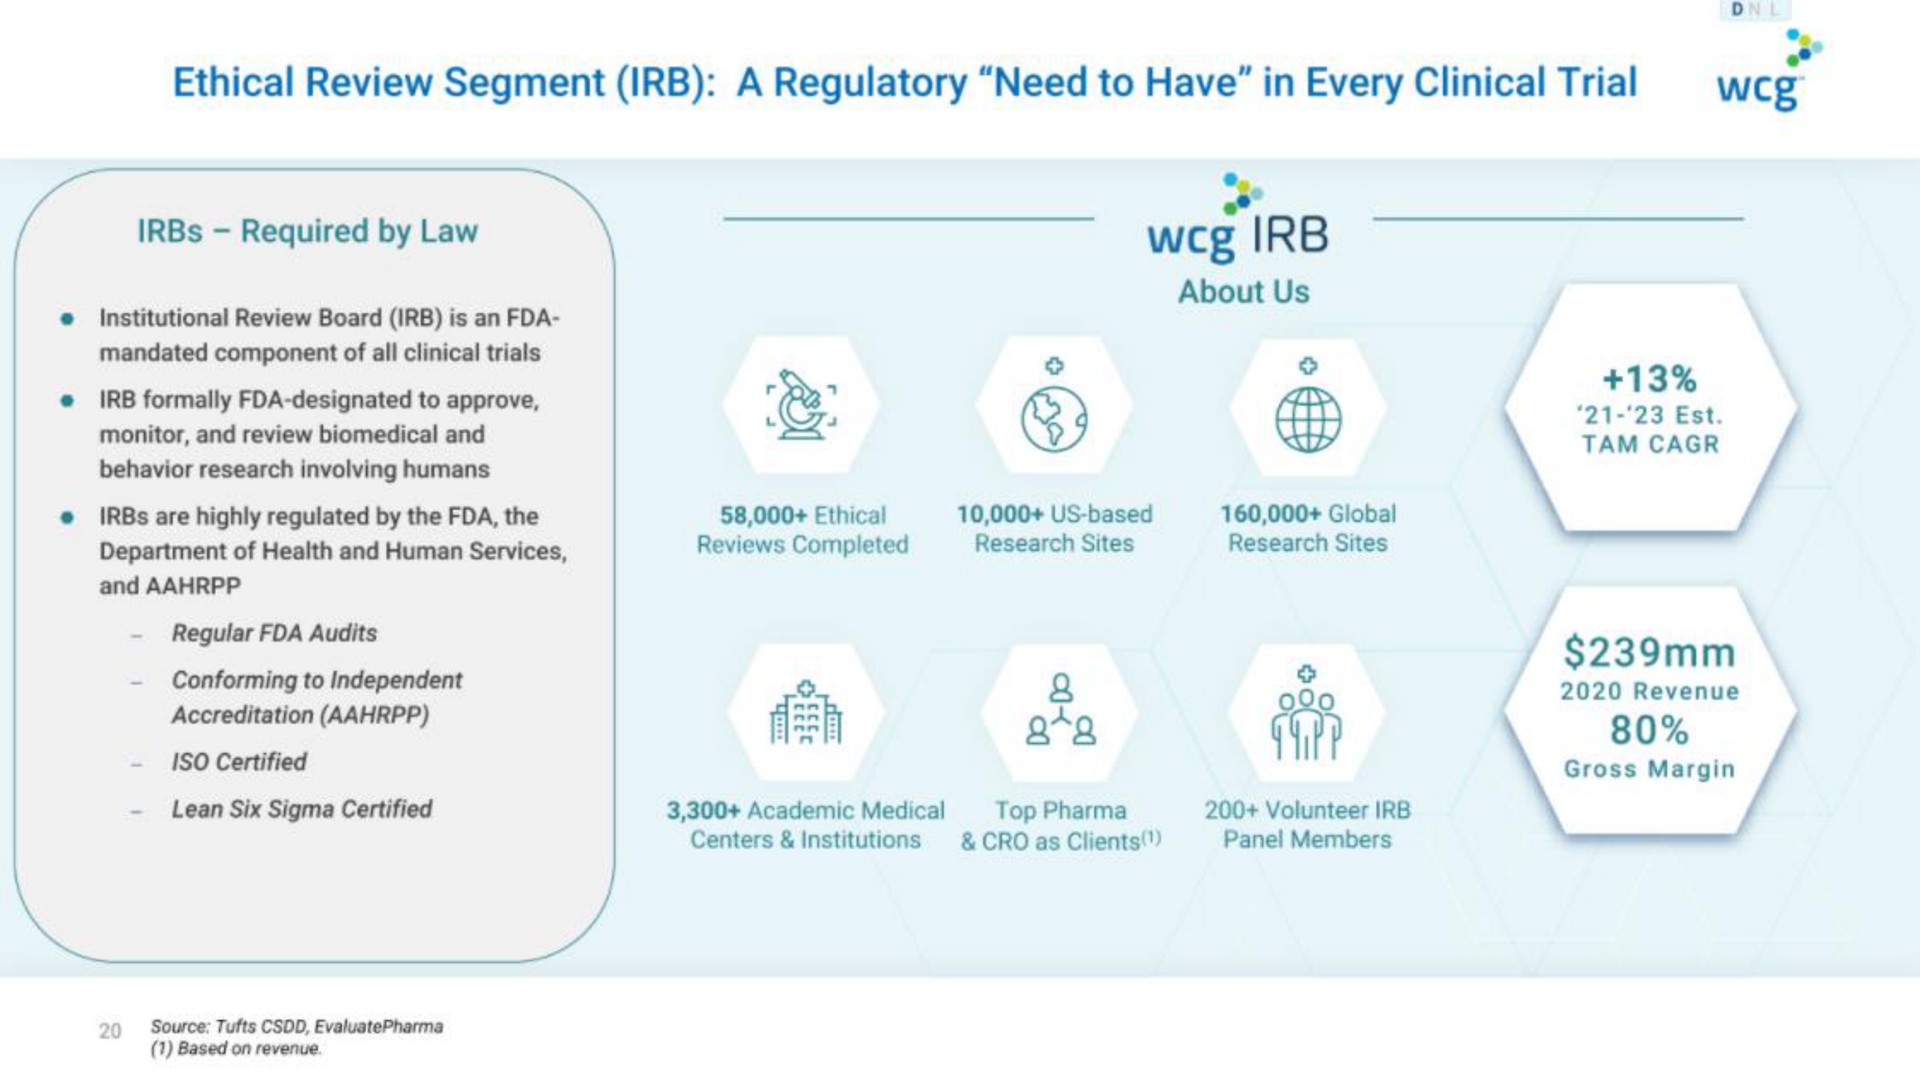 ethical review segment a regulatory need to have in every clinical trial | WCG